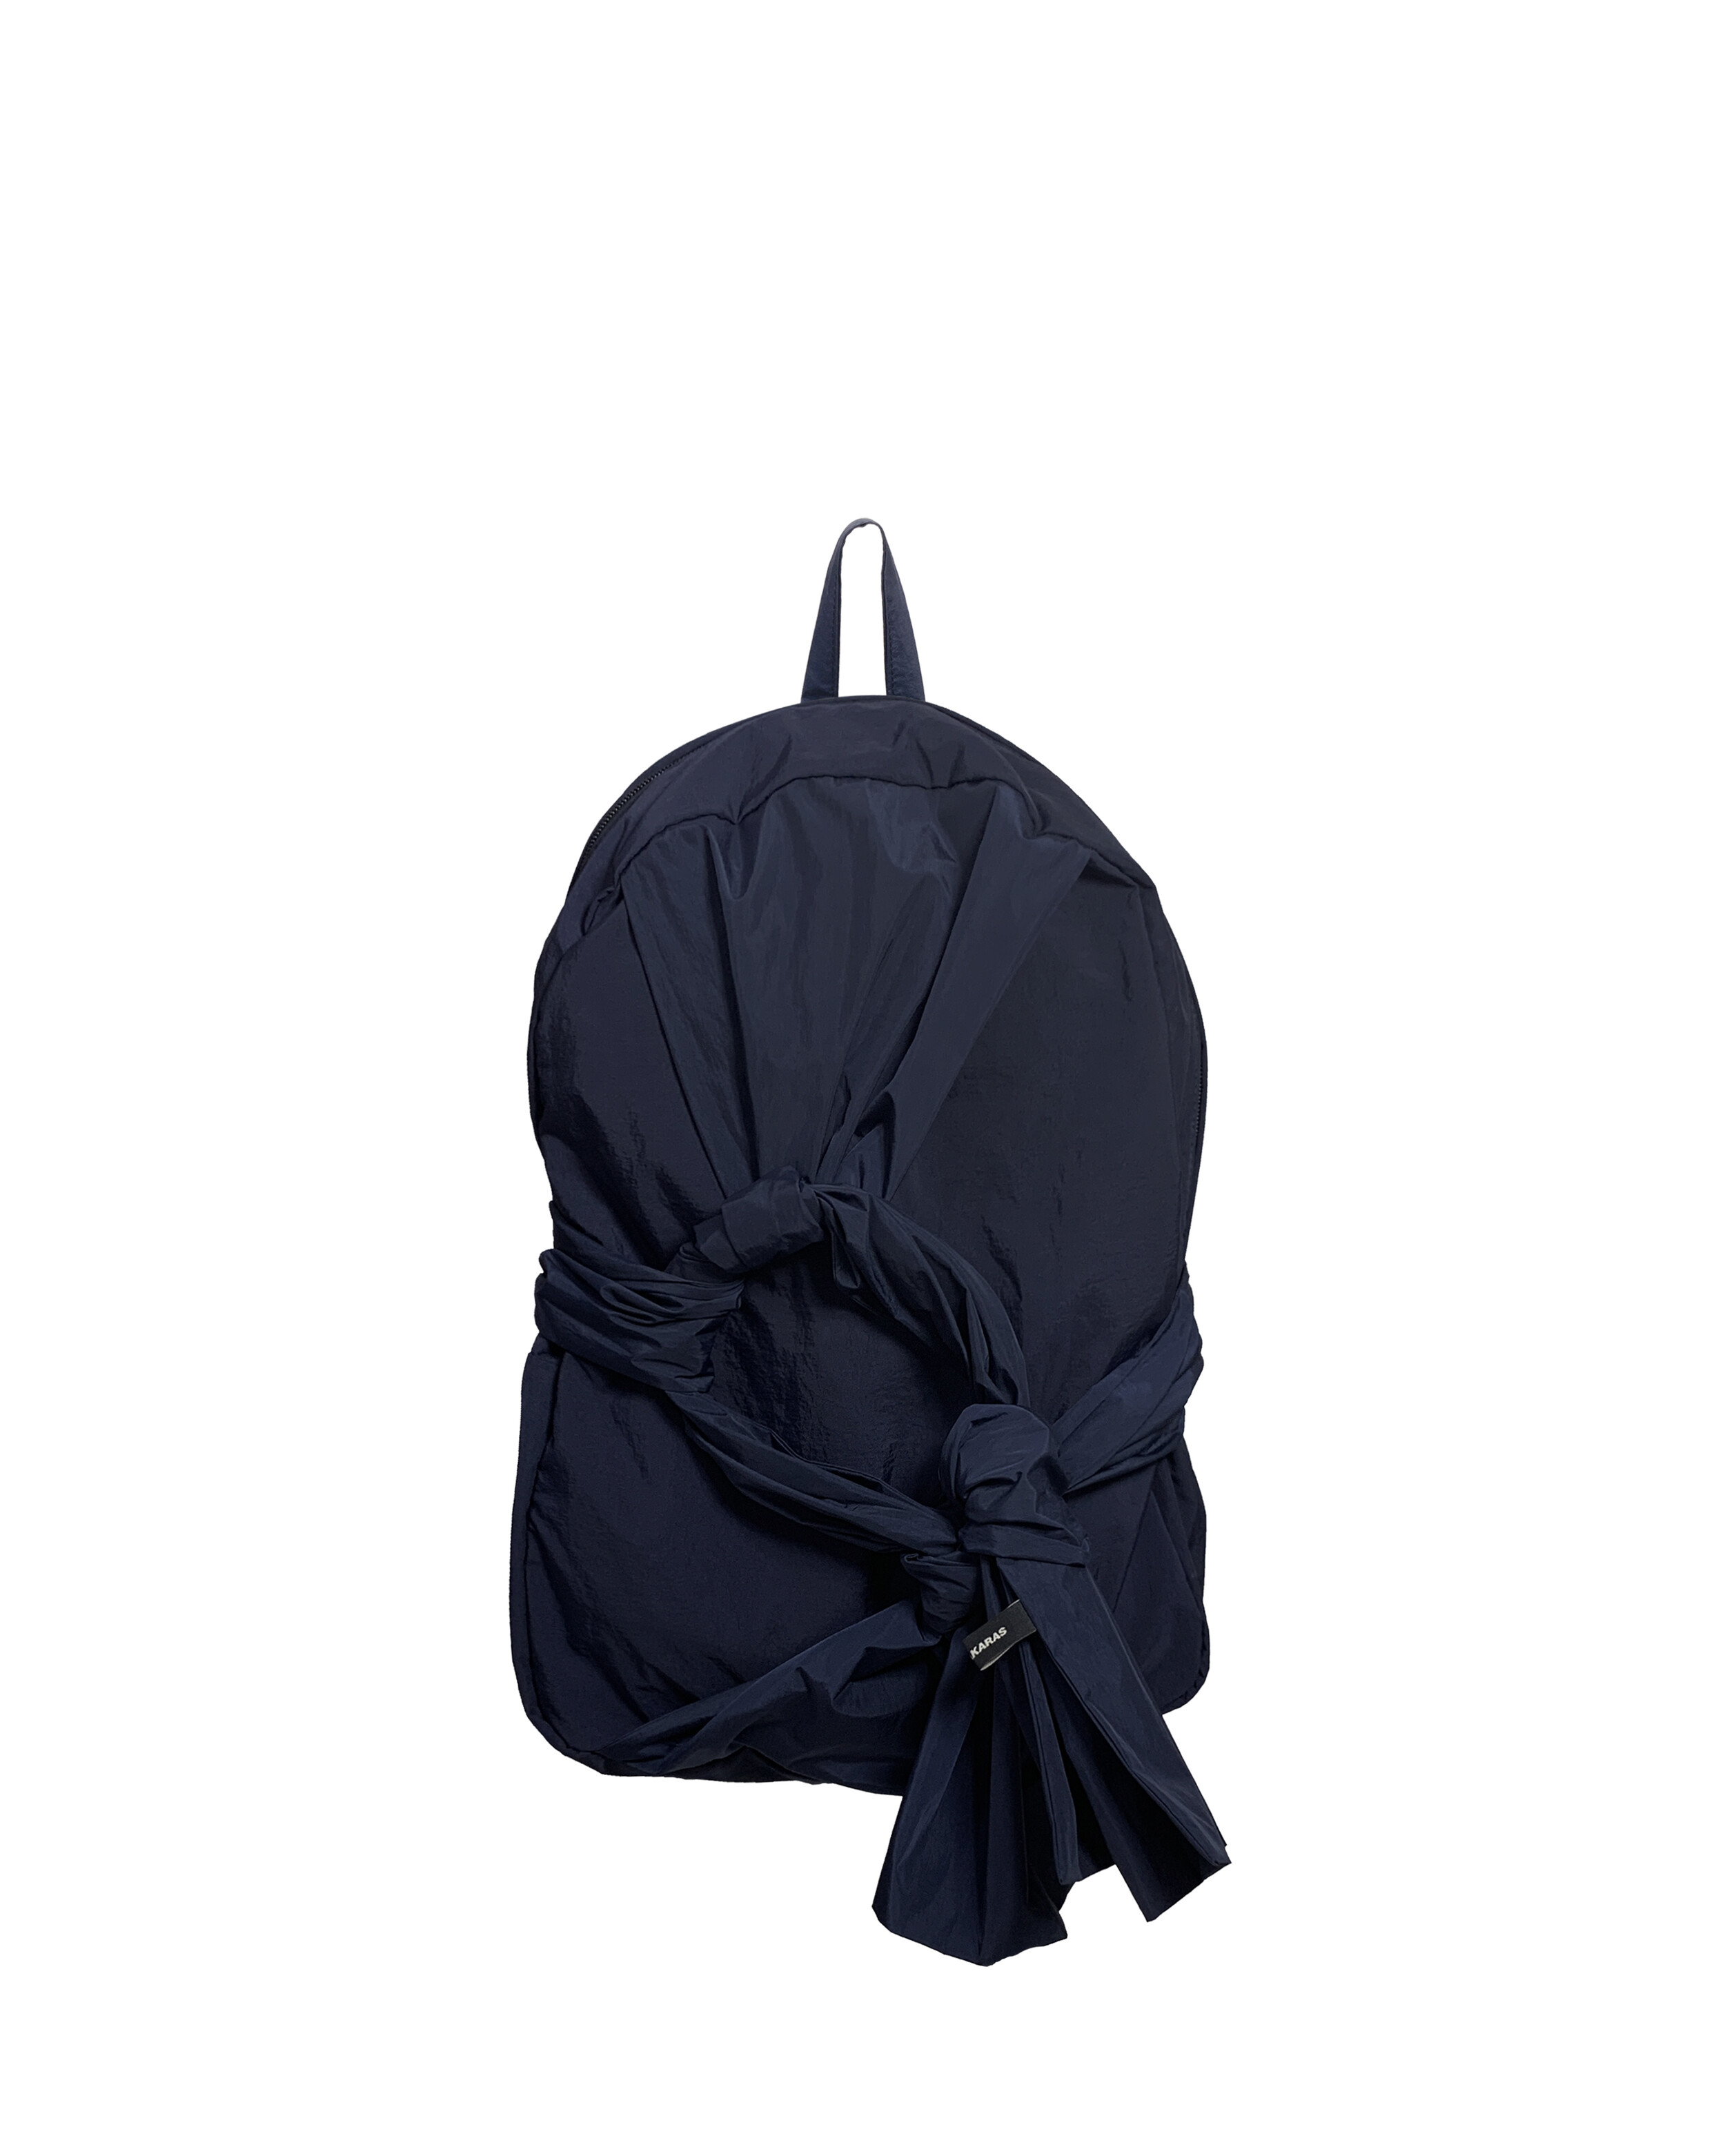 Knotted Backpack (Nylon-Navy)